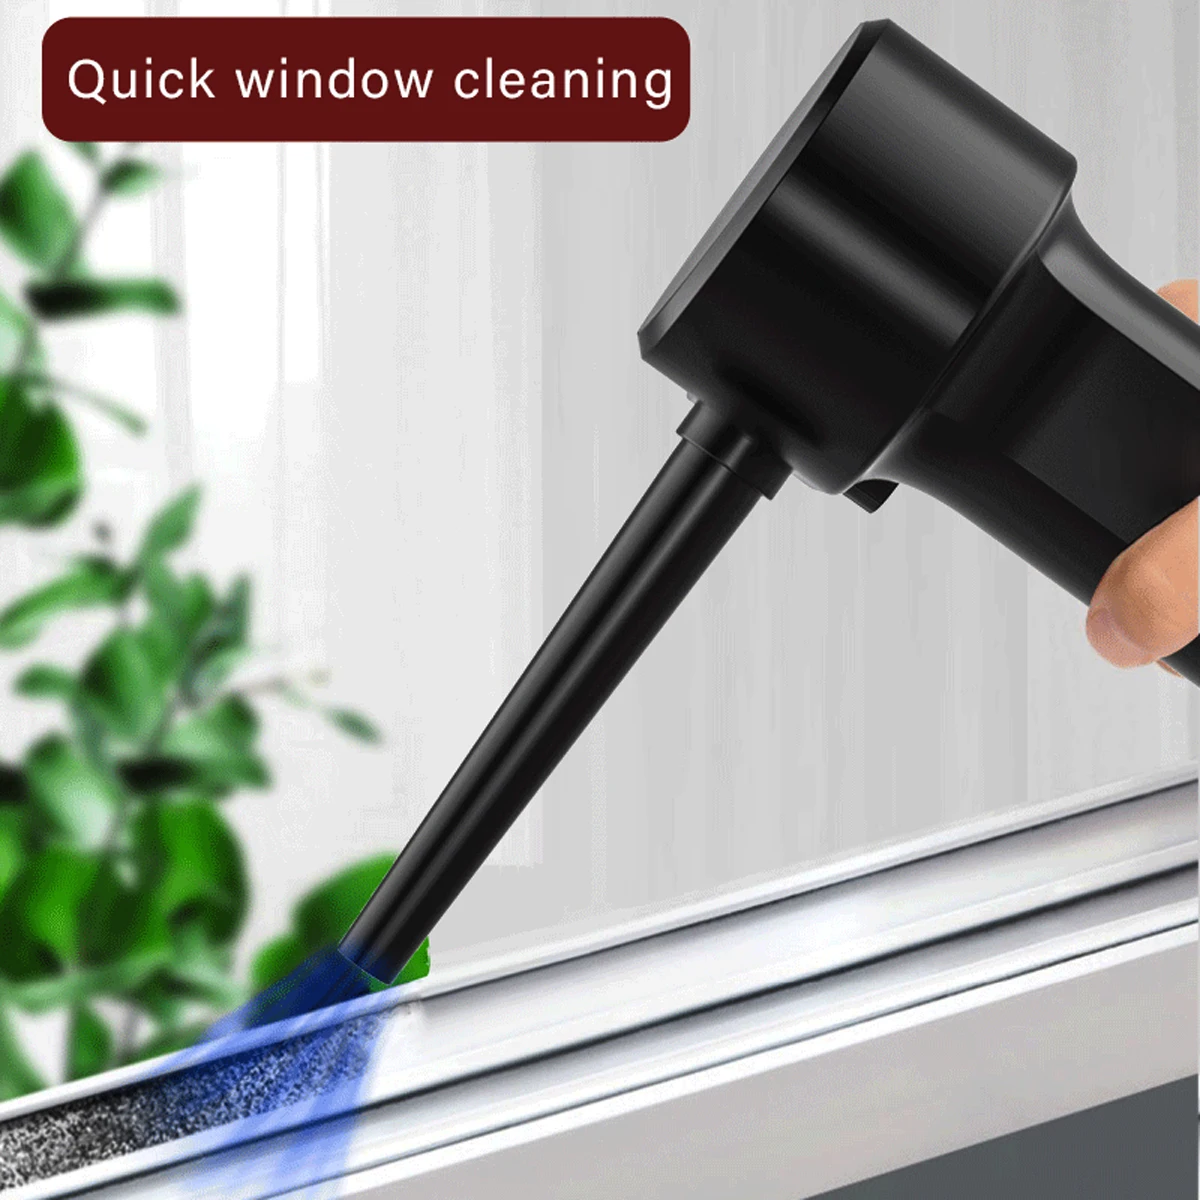 airless spray gun Cordless Air Duster For Computers Keyboard Car Rechargeable Handheld Wireless Dust Blower Cleaning Electric Air Blower Cleaner flex buffer